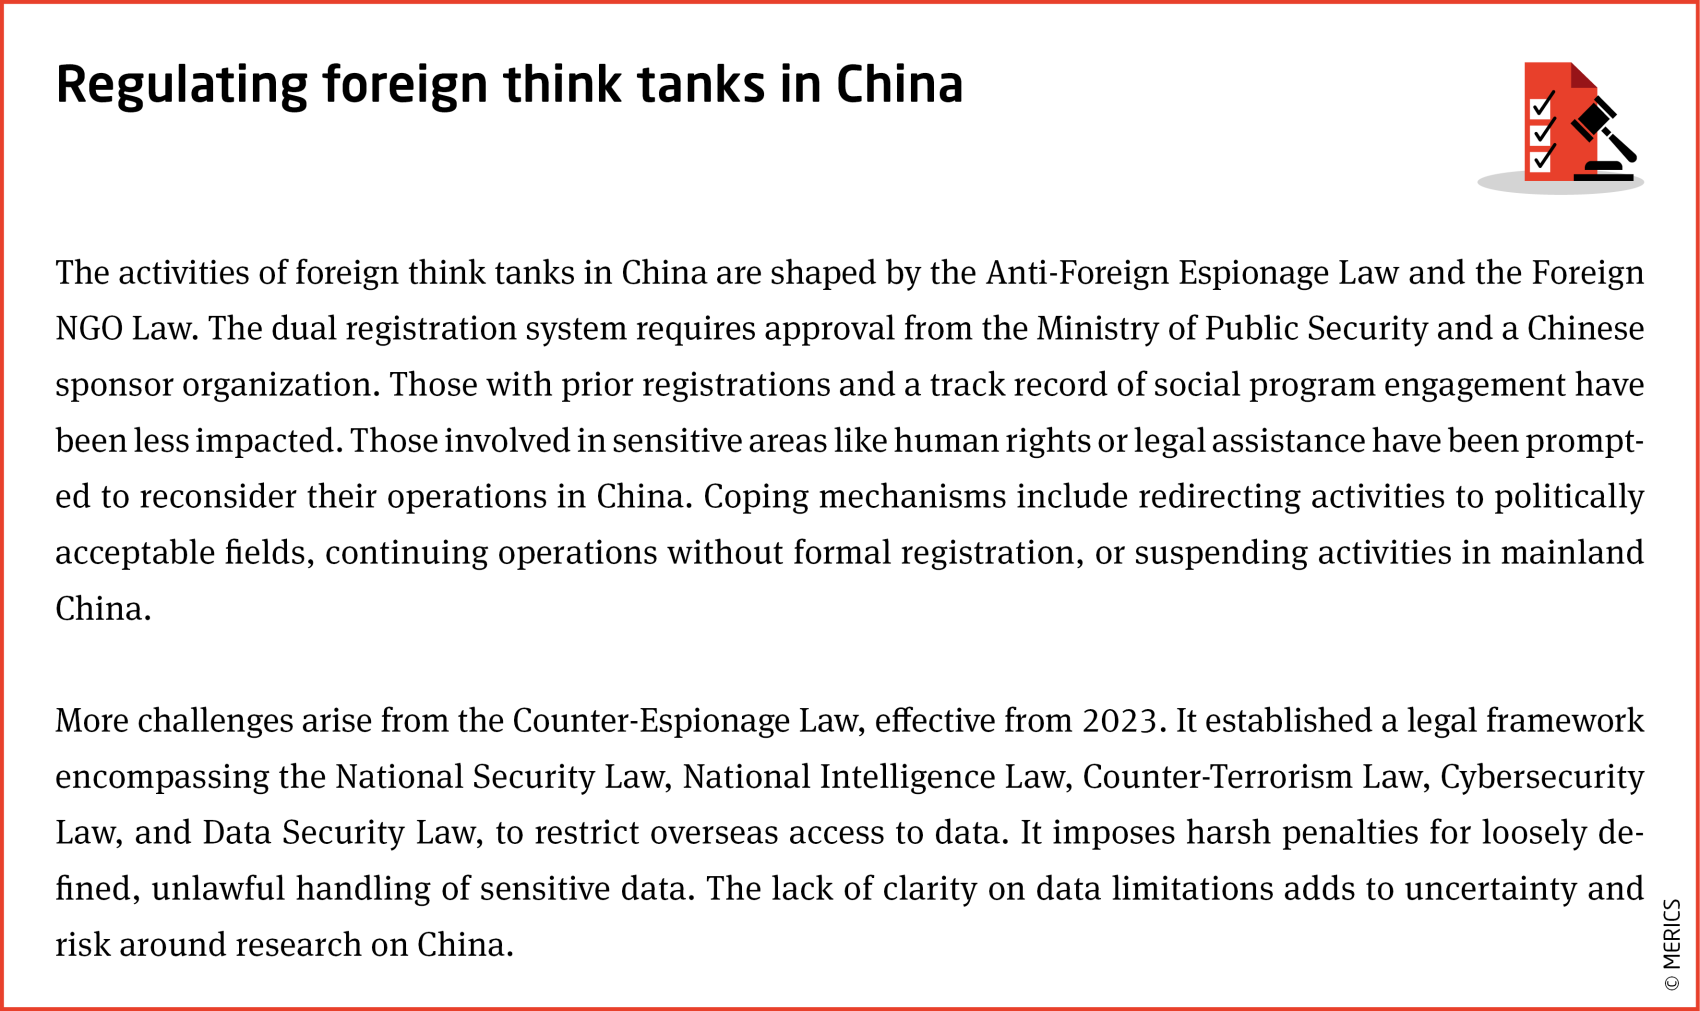 merics-regulating-foreign-think-tanks-in-china.png